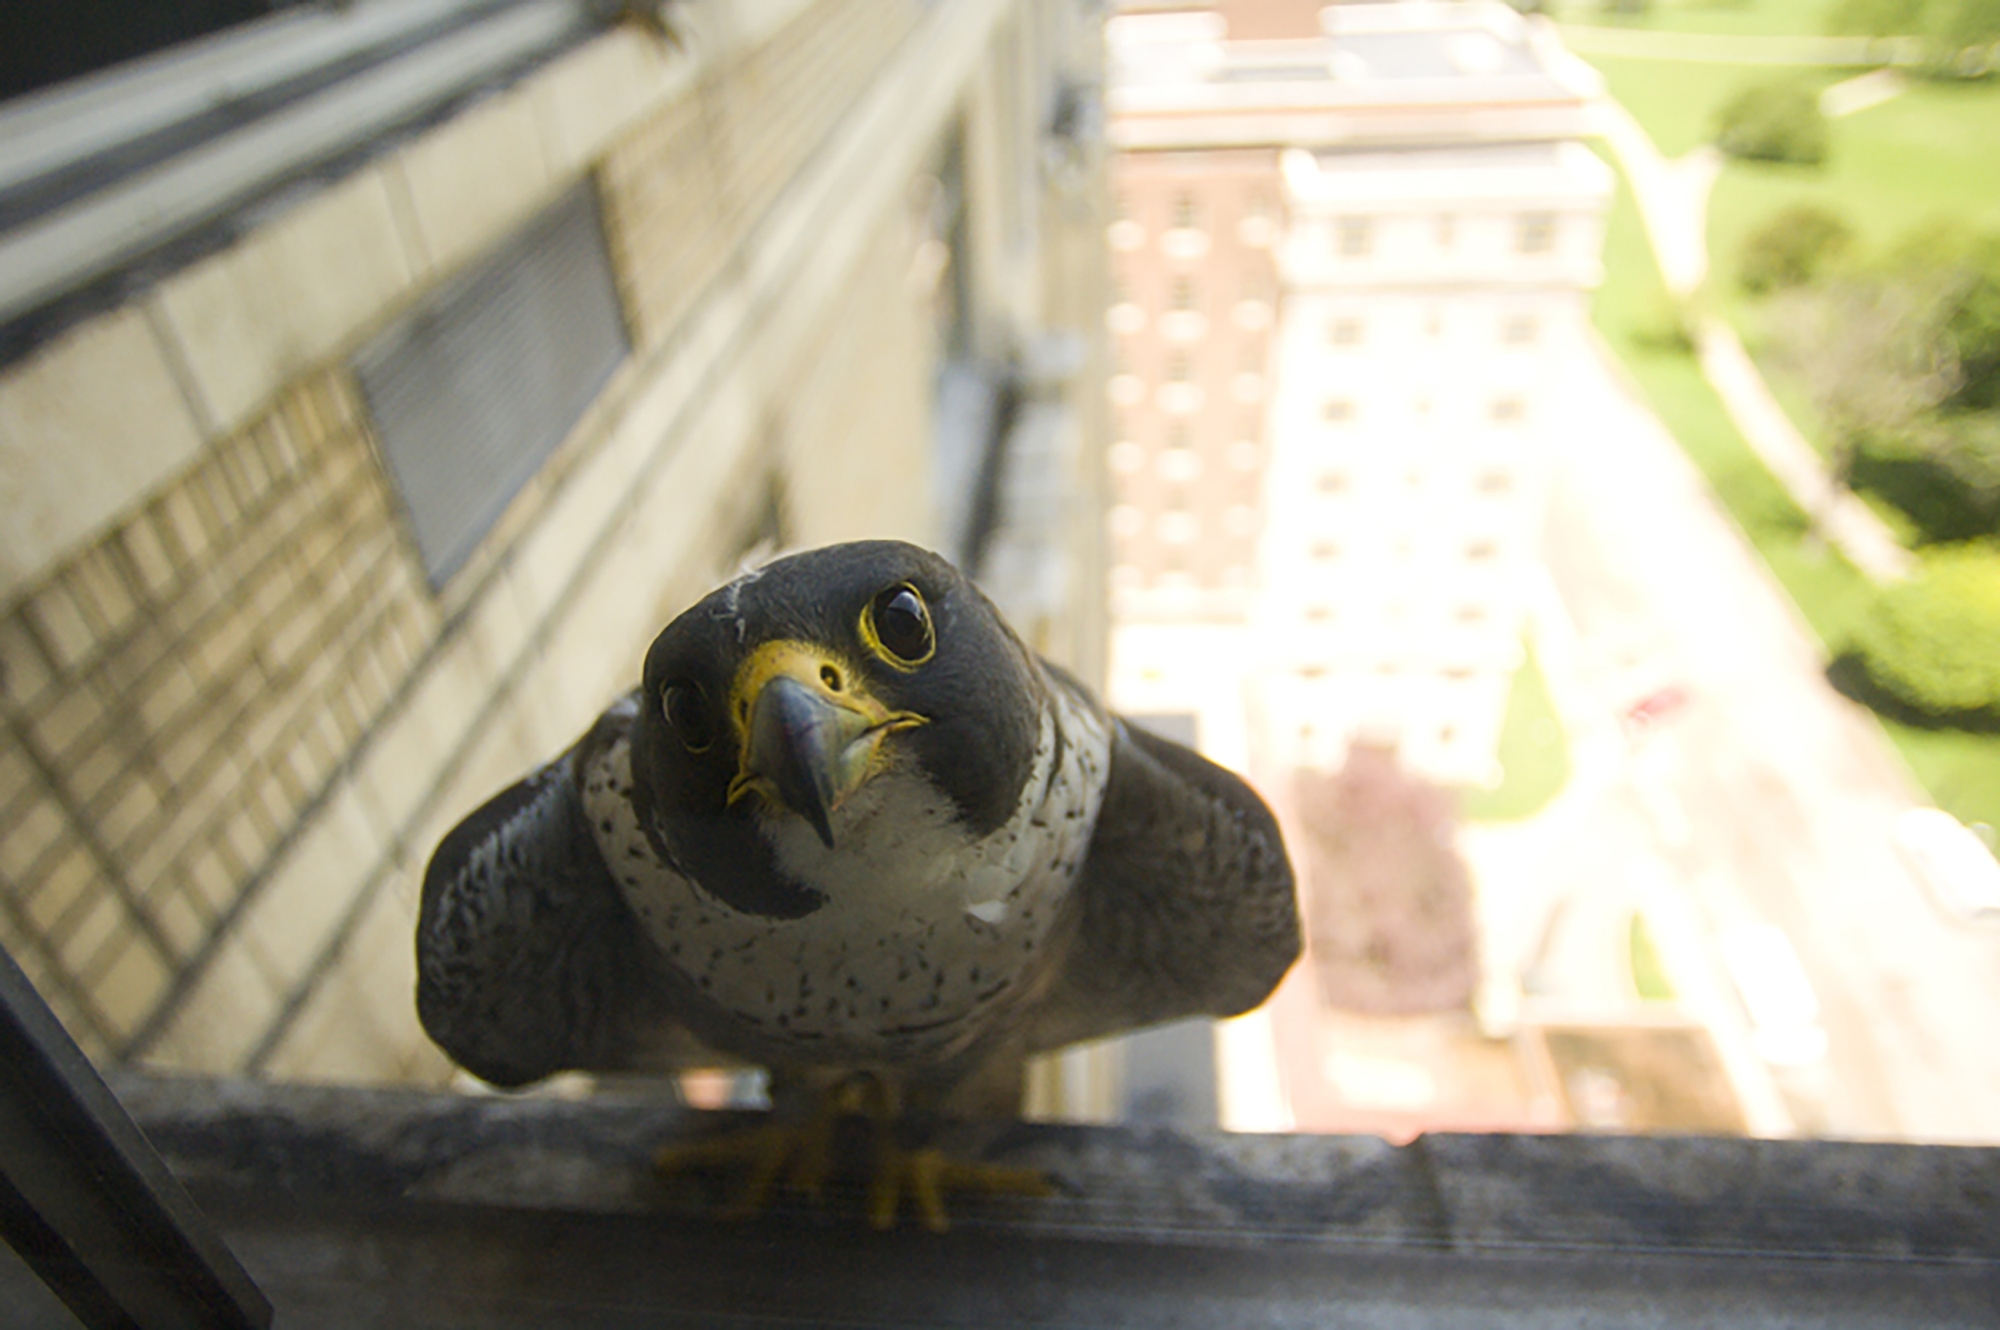 Peregrine falcons, which had been virtually eradicated from eastern North America at one time, today are successfully nesting atop skyscrapers.